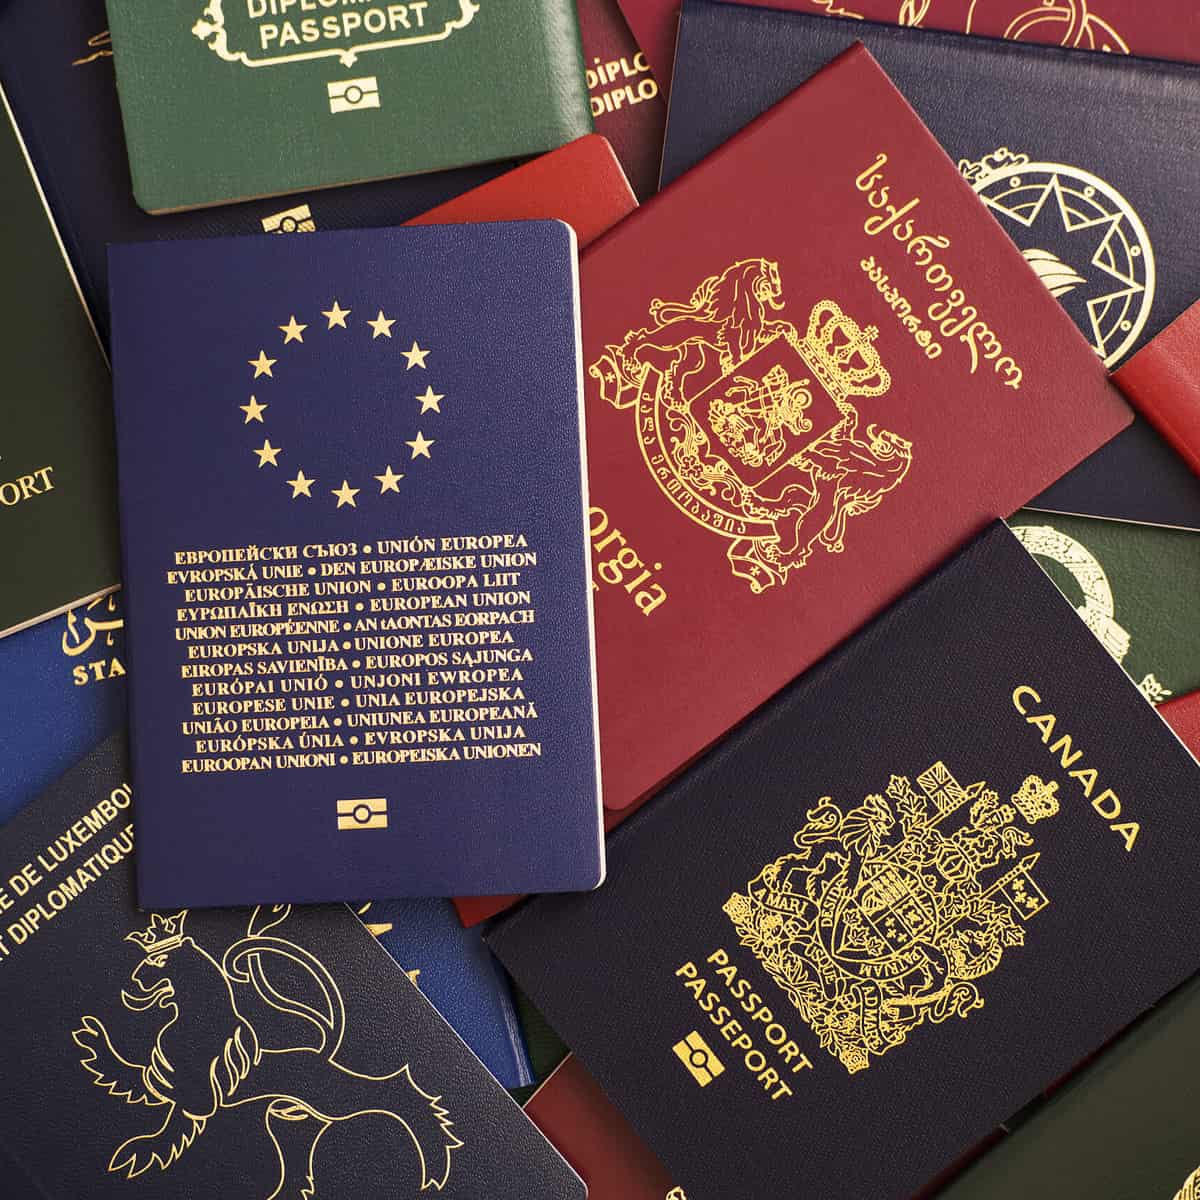 Best and worst value for money passports in the world